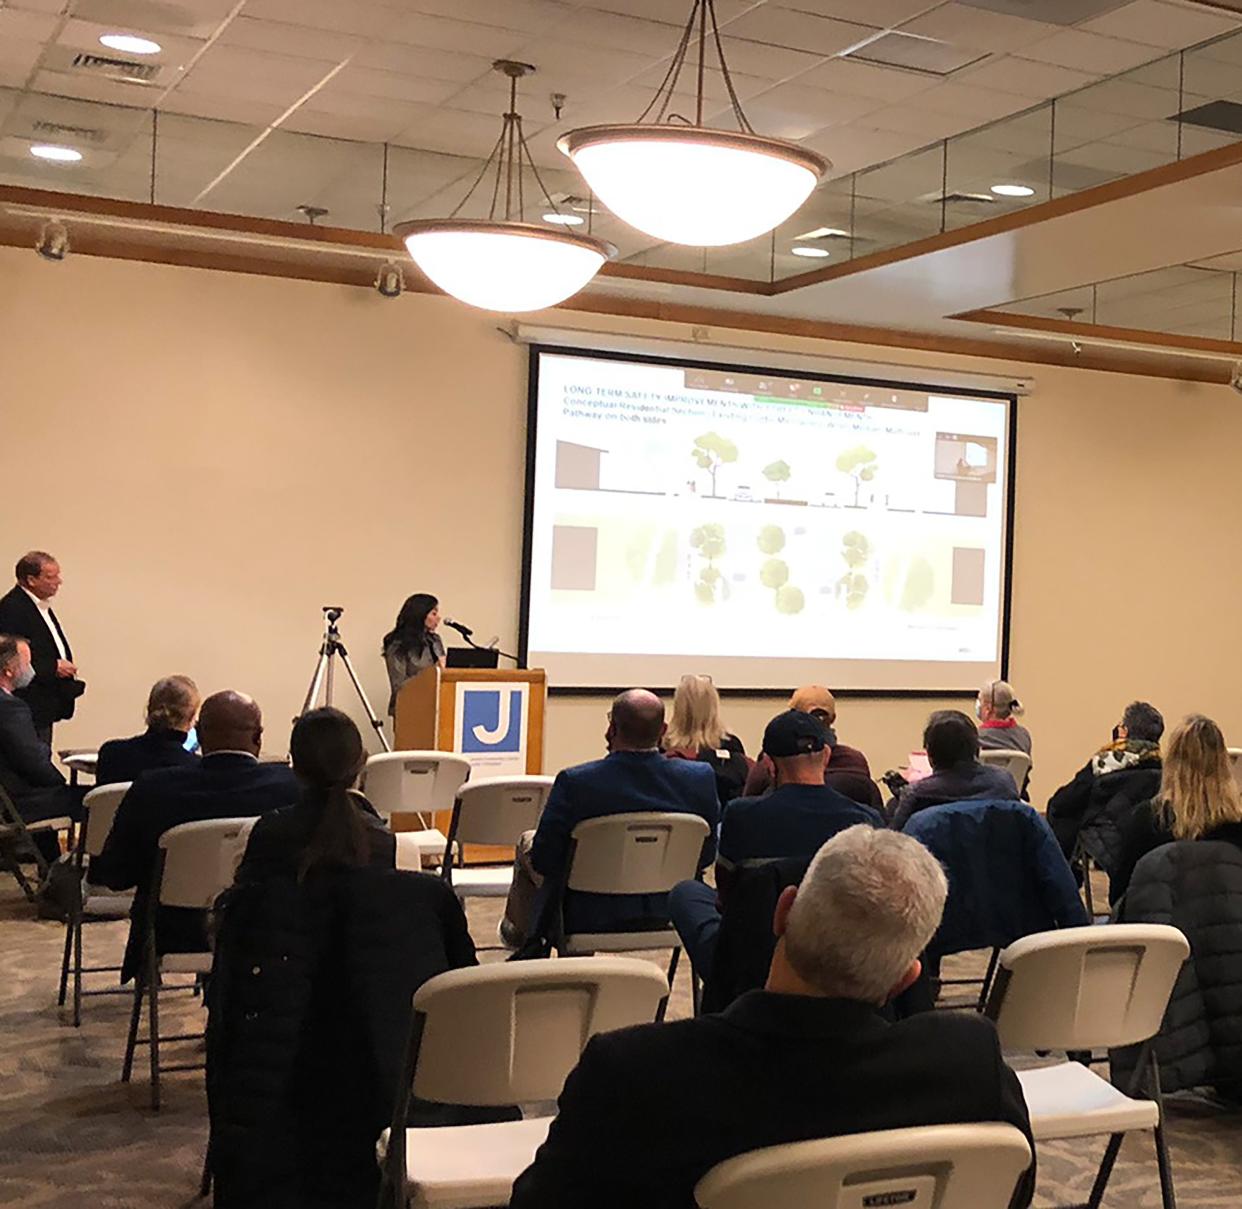 The cities of Bexley and Columbus convened a series of public forums over the past year to gather residents’ input on the Joint Livingston Avenue Plan.